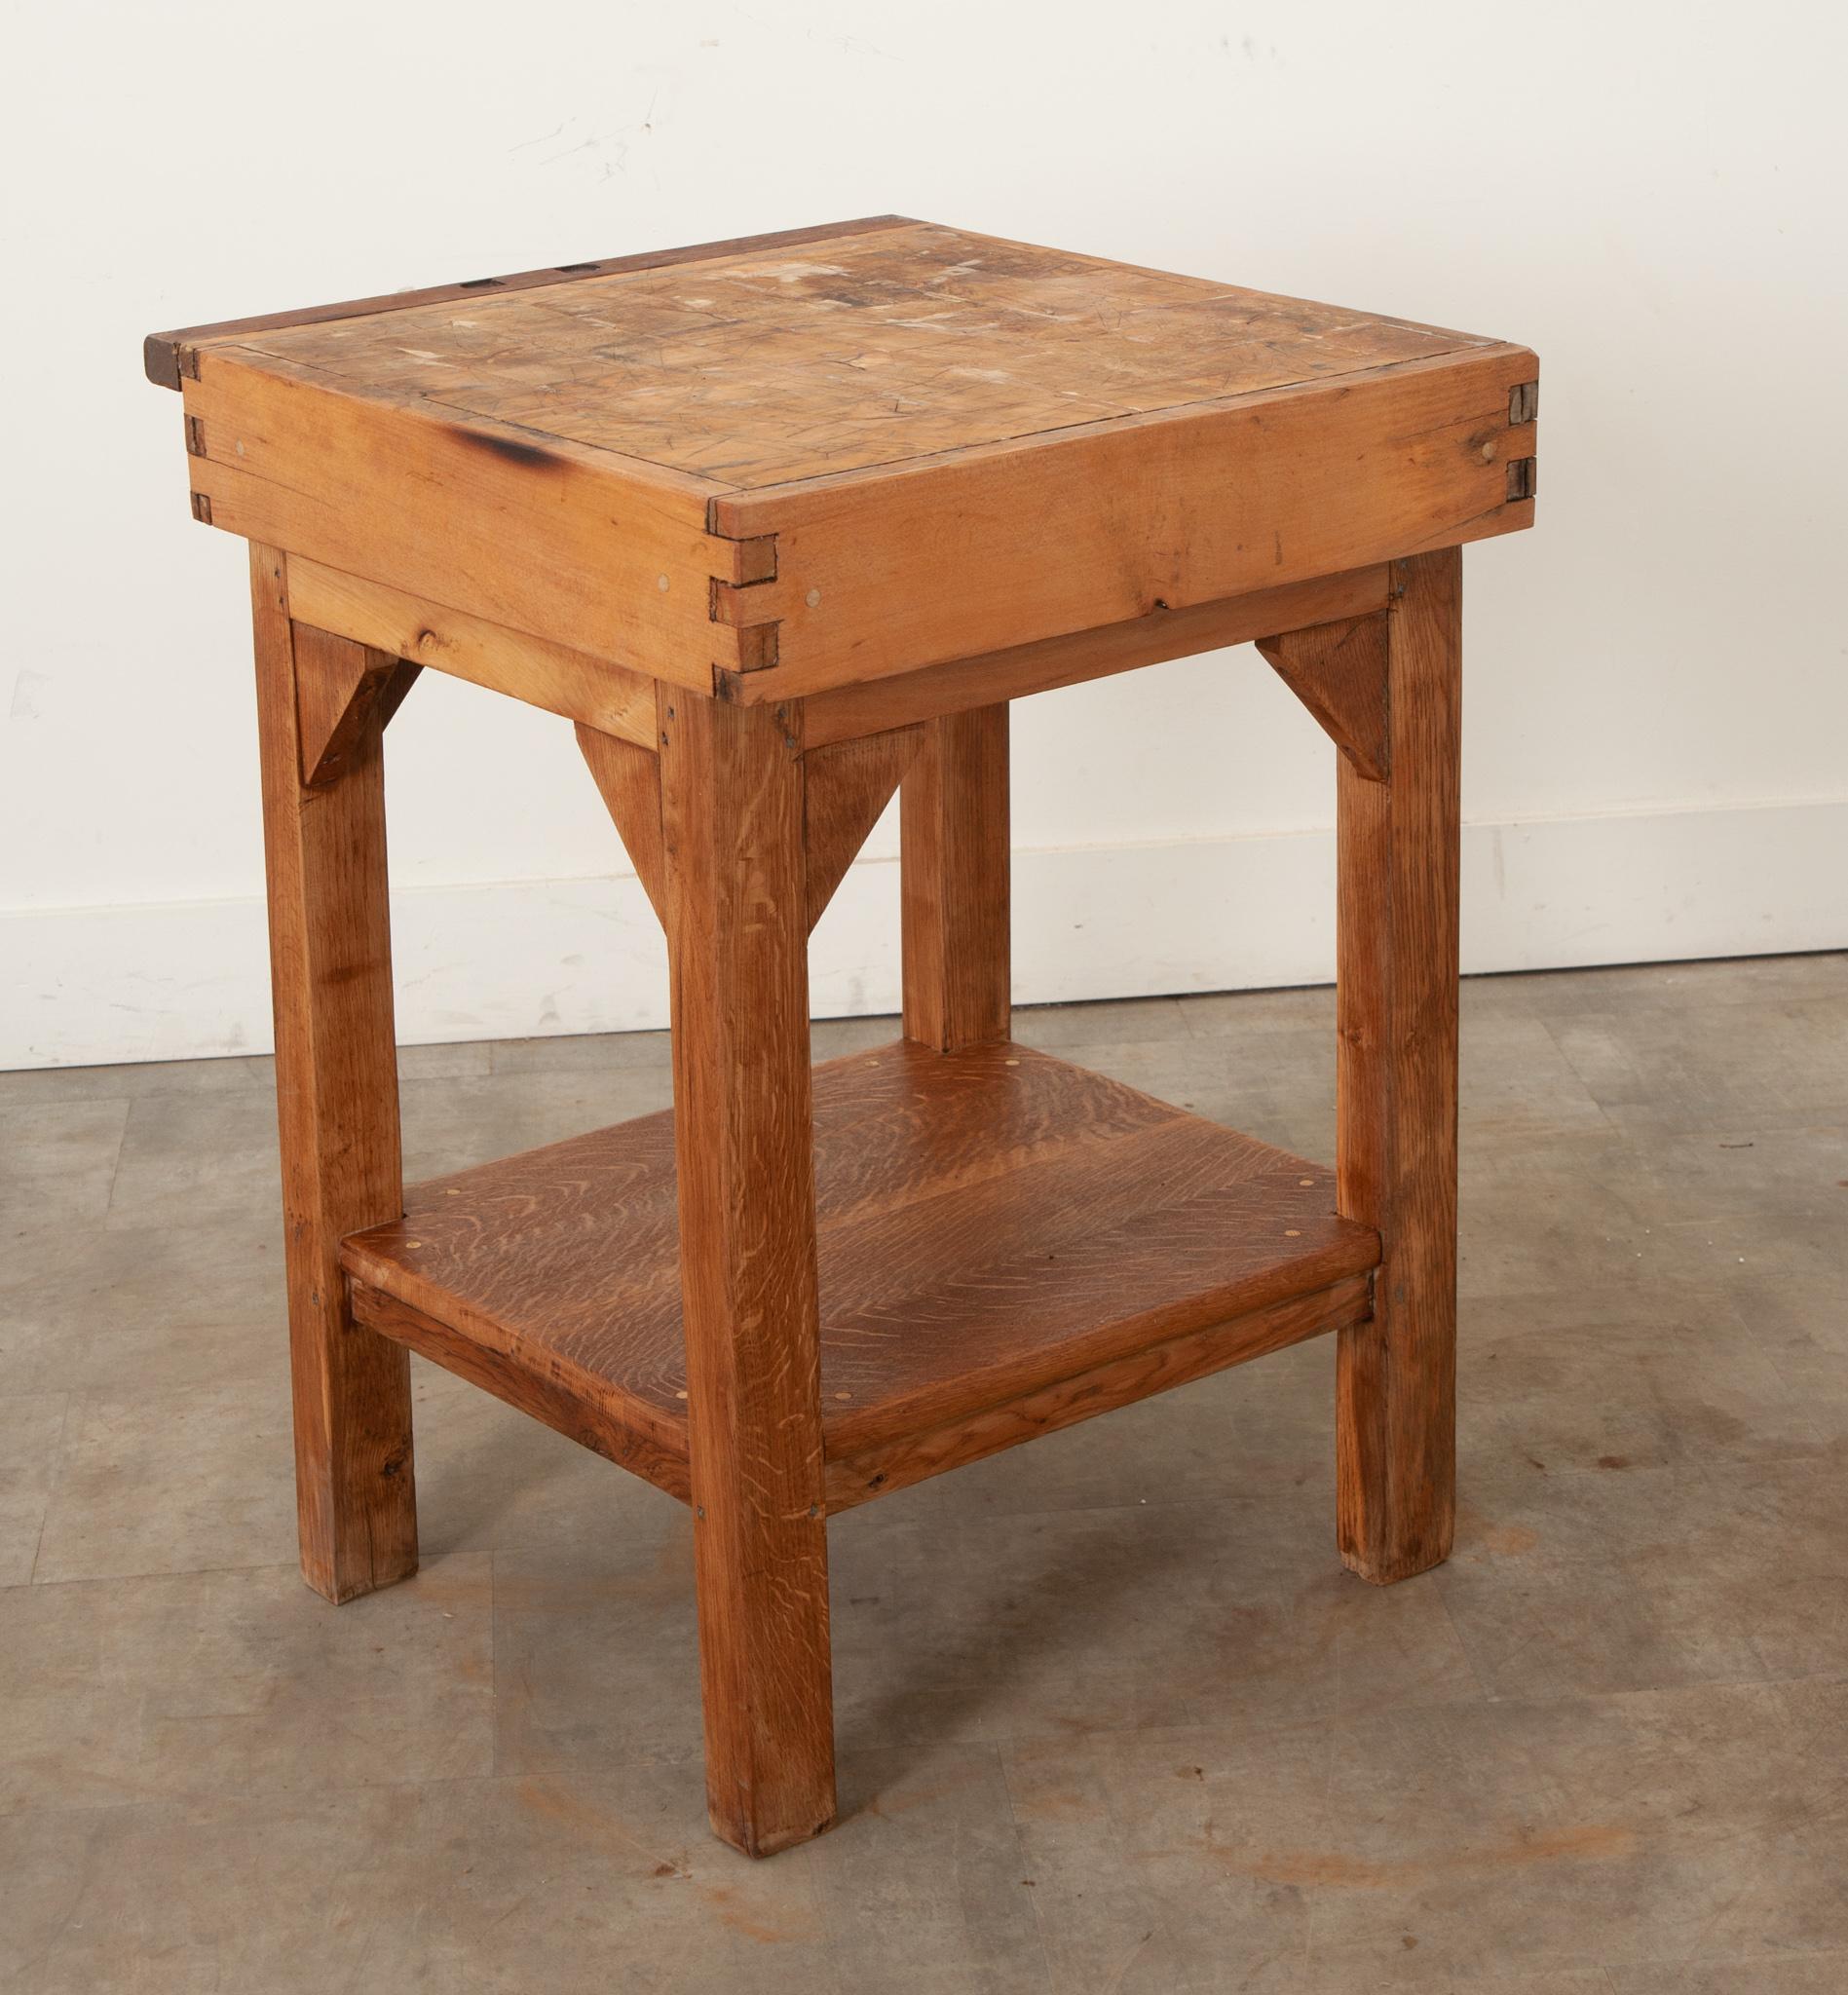 A French hand-carved square butcher block table made from oak and pine. This functional antique has a thick top made of many wood fragments all held together with steel bindings. The blocky legs are joined by a stretcher shelf below. The entire